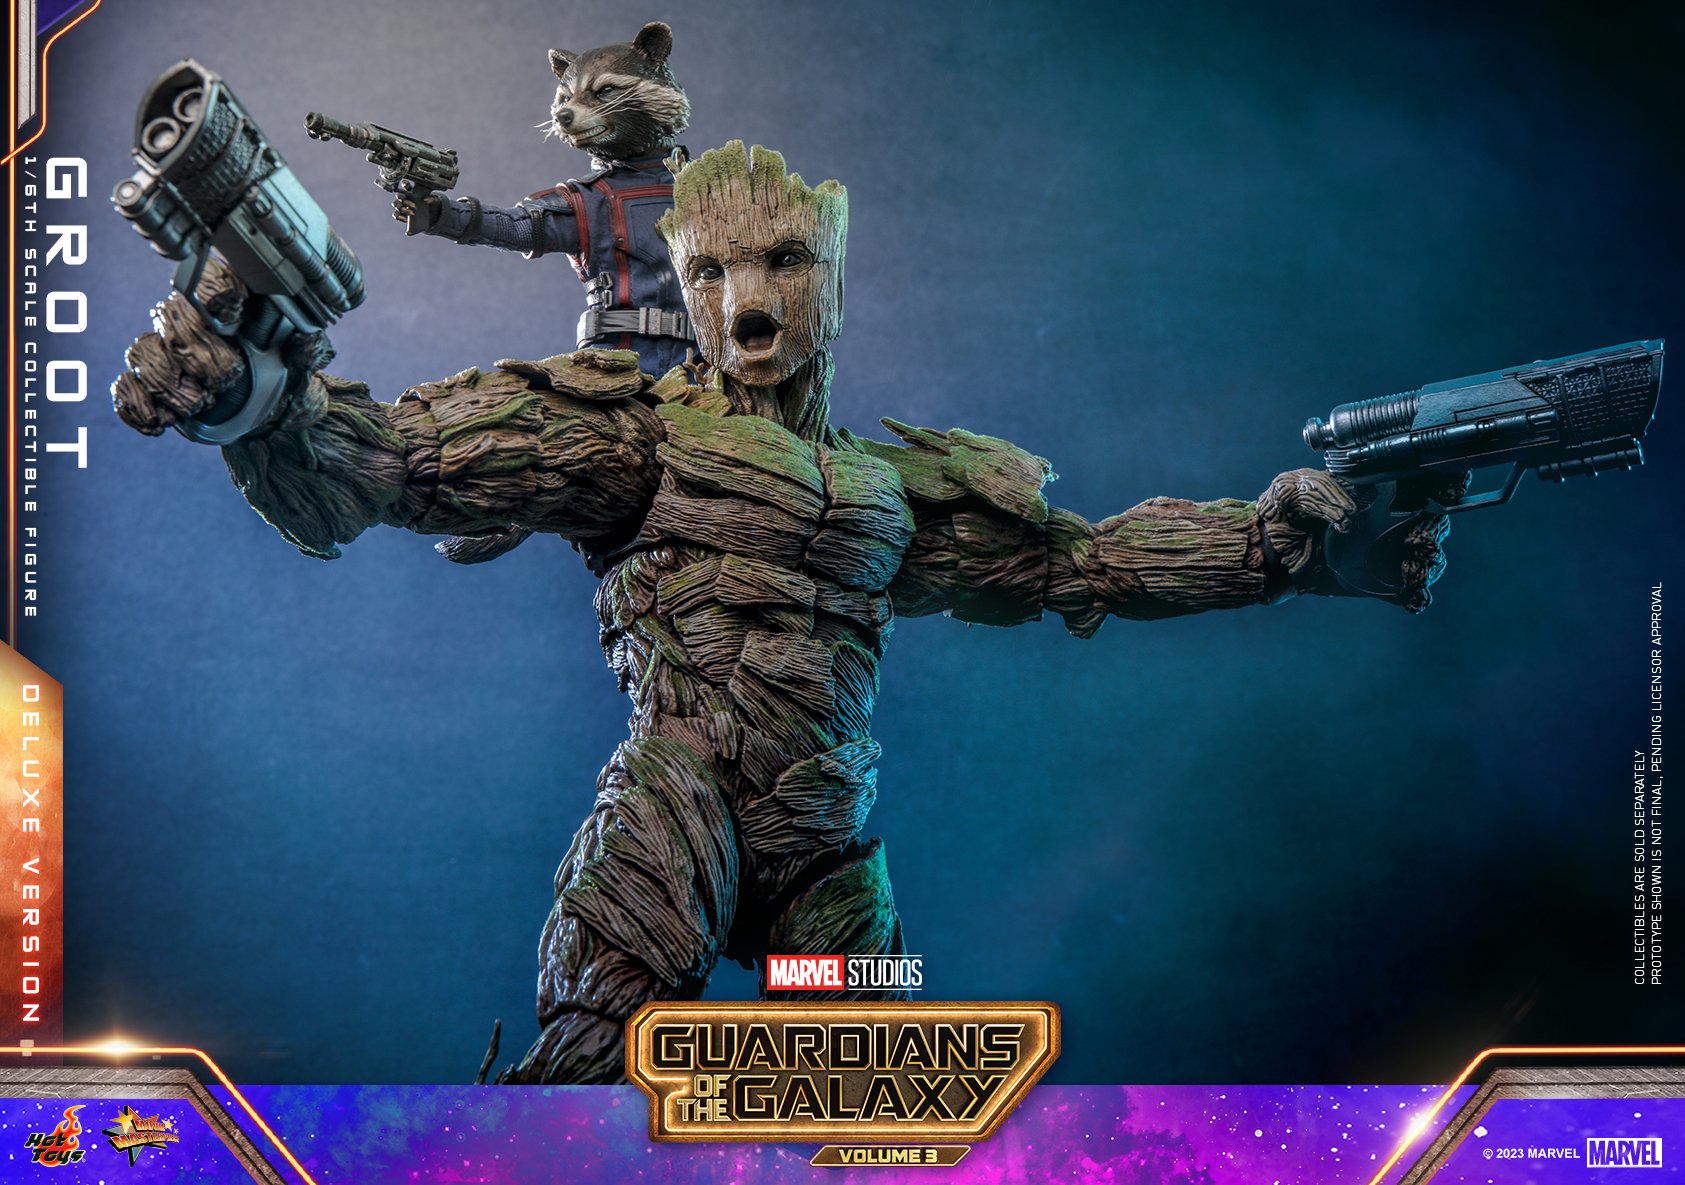 Hot-Toys-GotG3-Groot-Deluxe-010.jpeg